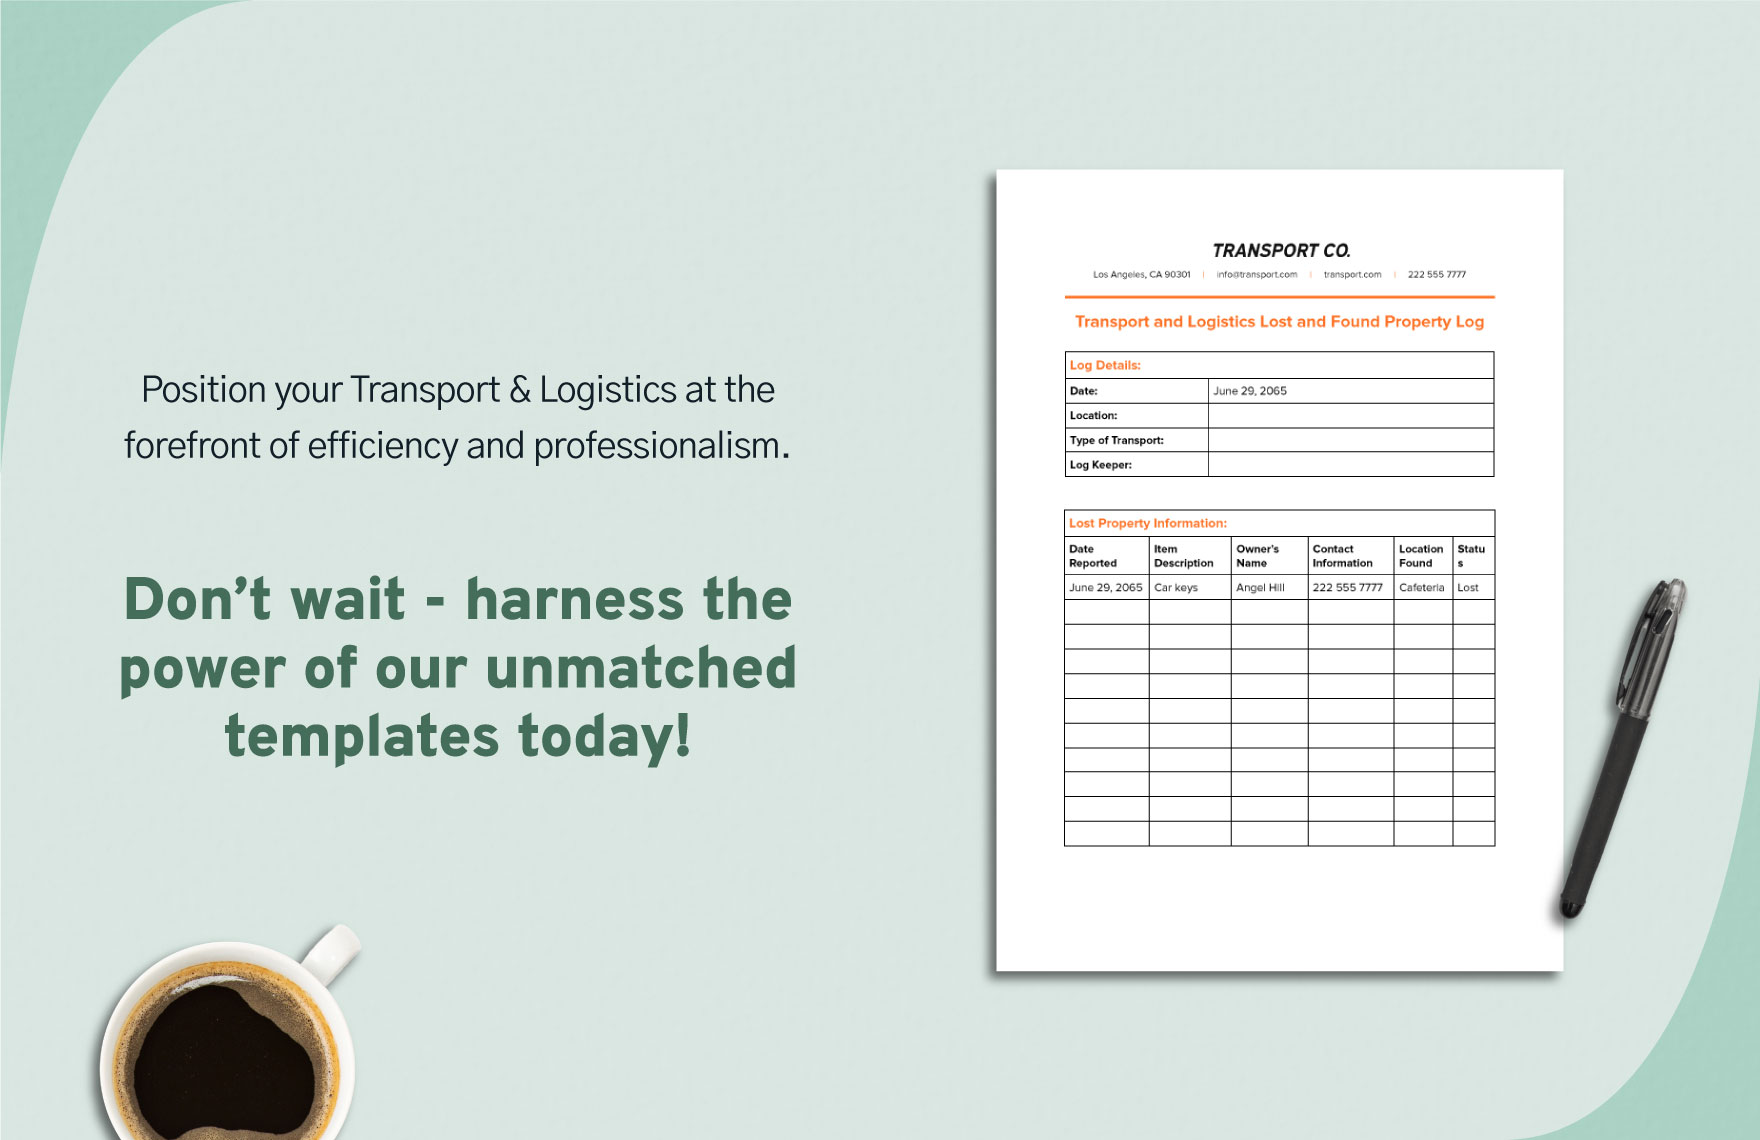 Transport and Logistics Lost and Found Property Log Template